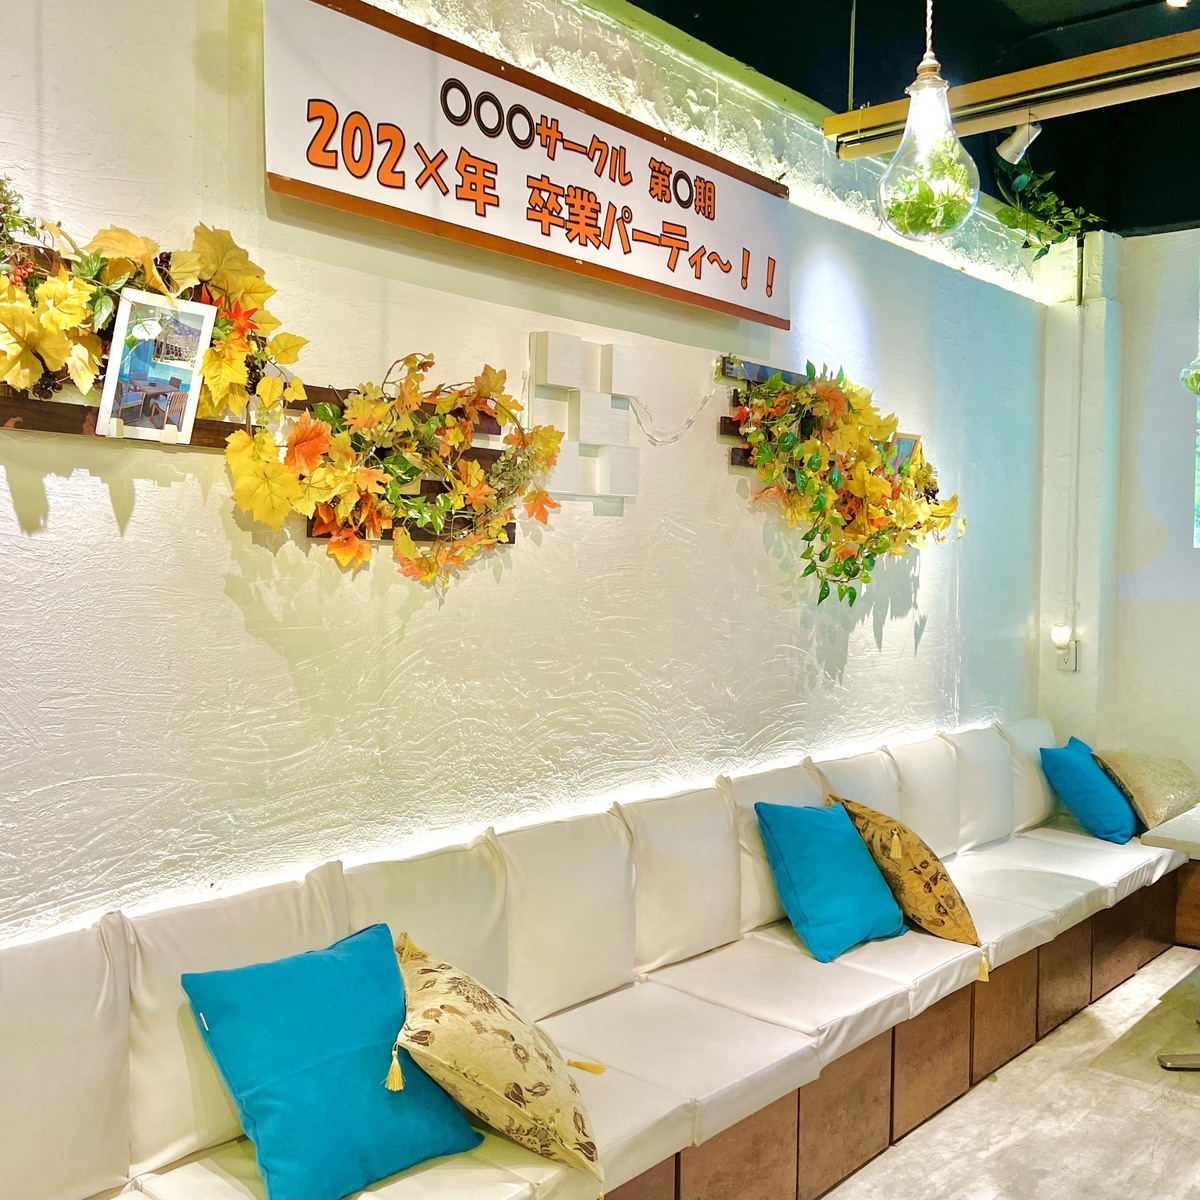 Recommended for a wedding after-party in Shibuya! Shibuya Pikarie!